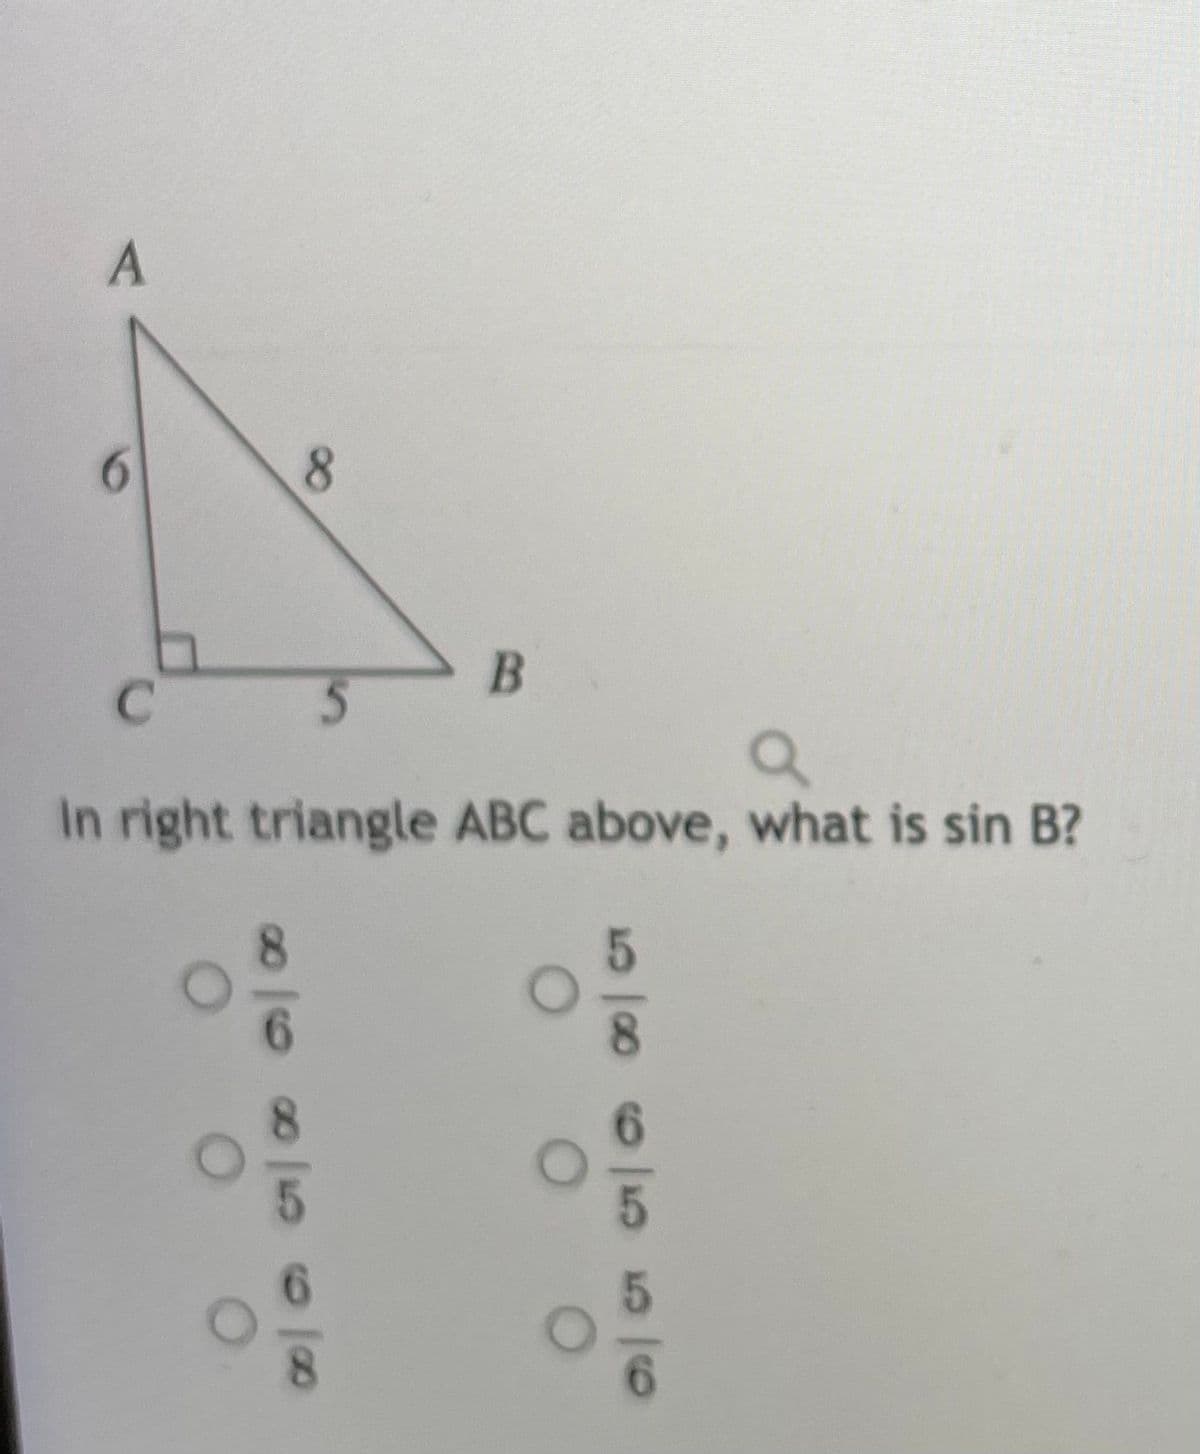 A
6.
8.
In right triangle ABC above, what is sin B?
5805 56
